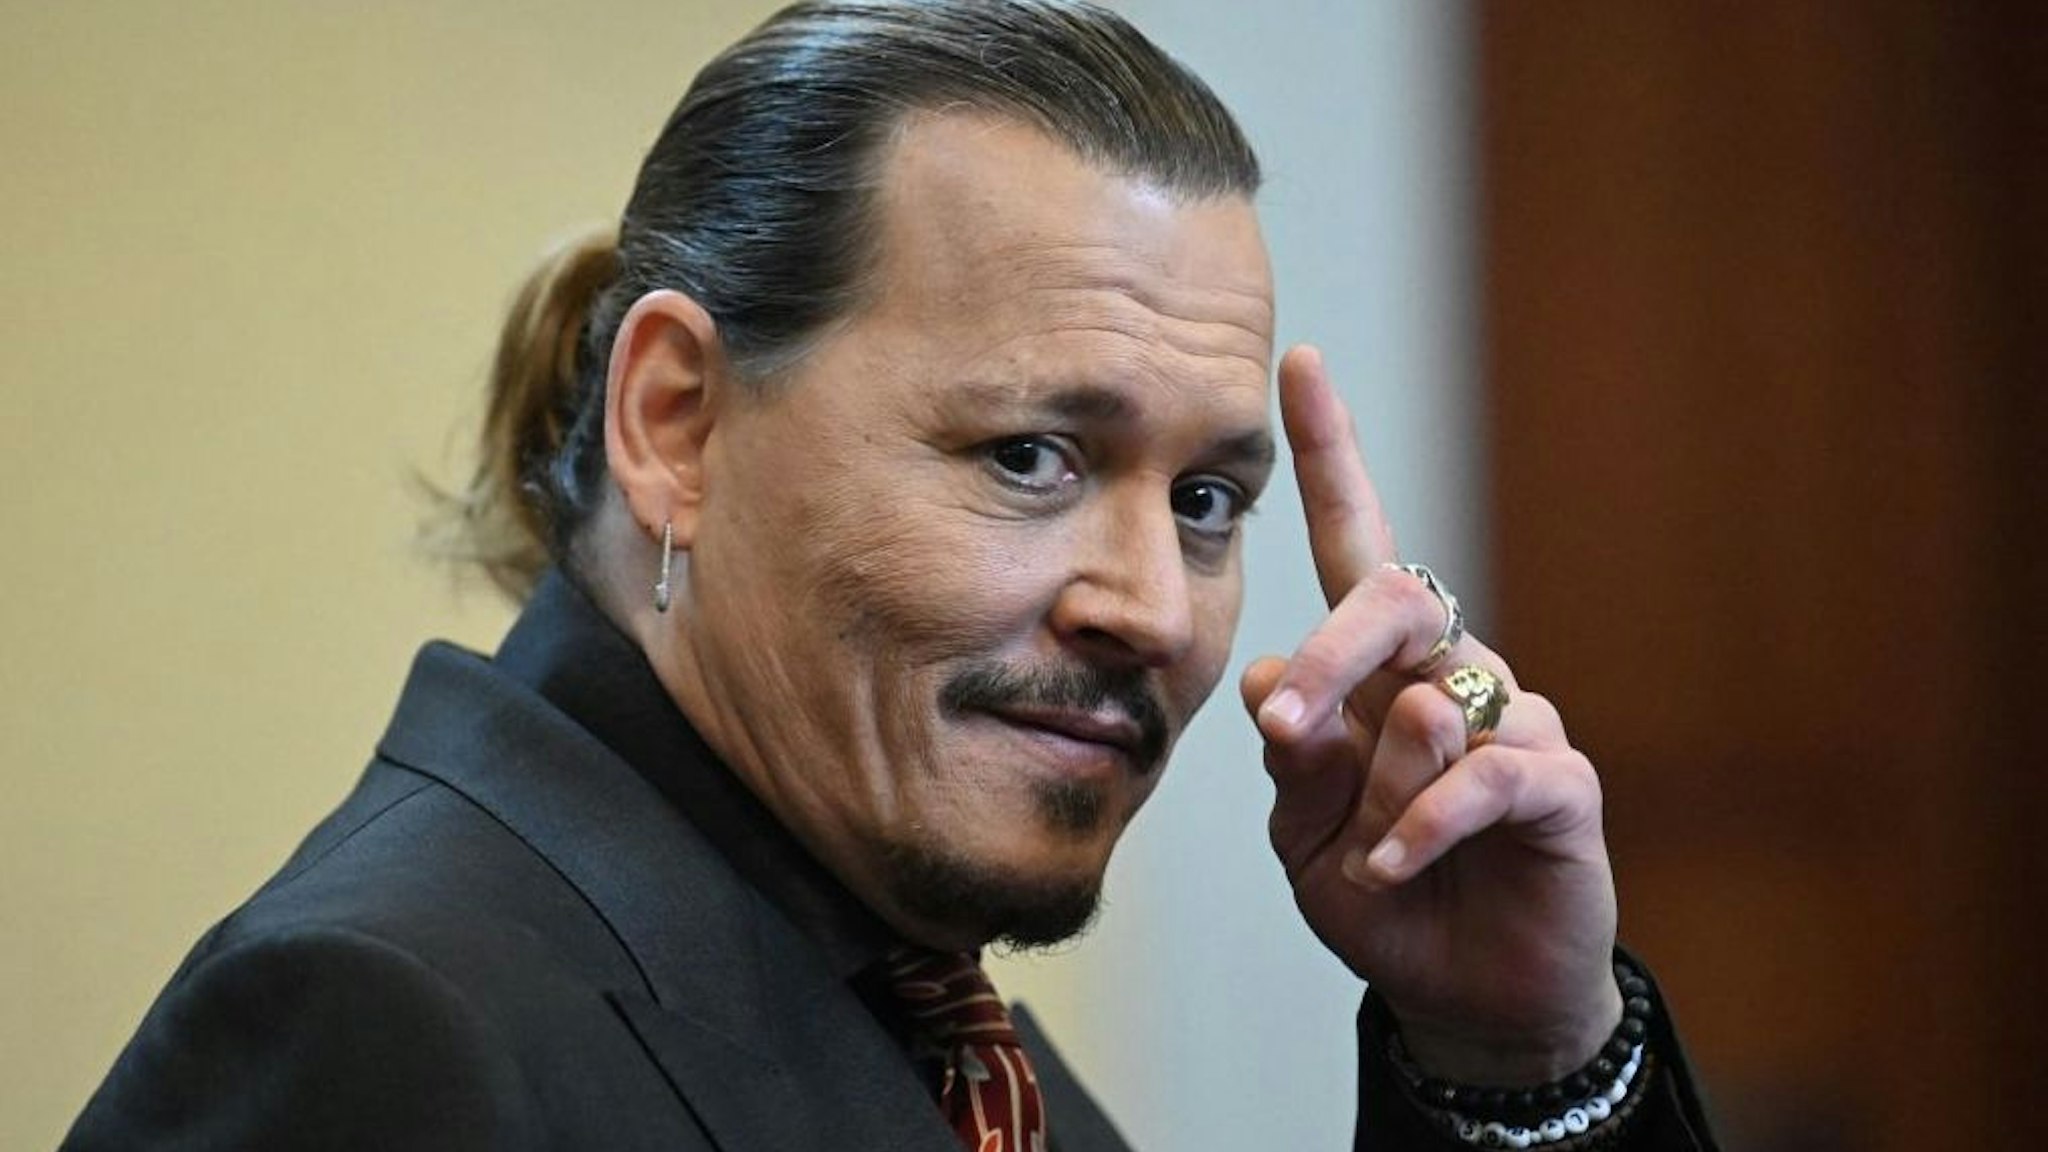 US actor Johnny Depp looks on during a hearing at the Fairfax County Circuit Courthouse in Fairfax, Virginia, on May 3, 2022.